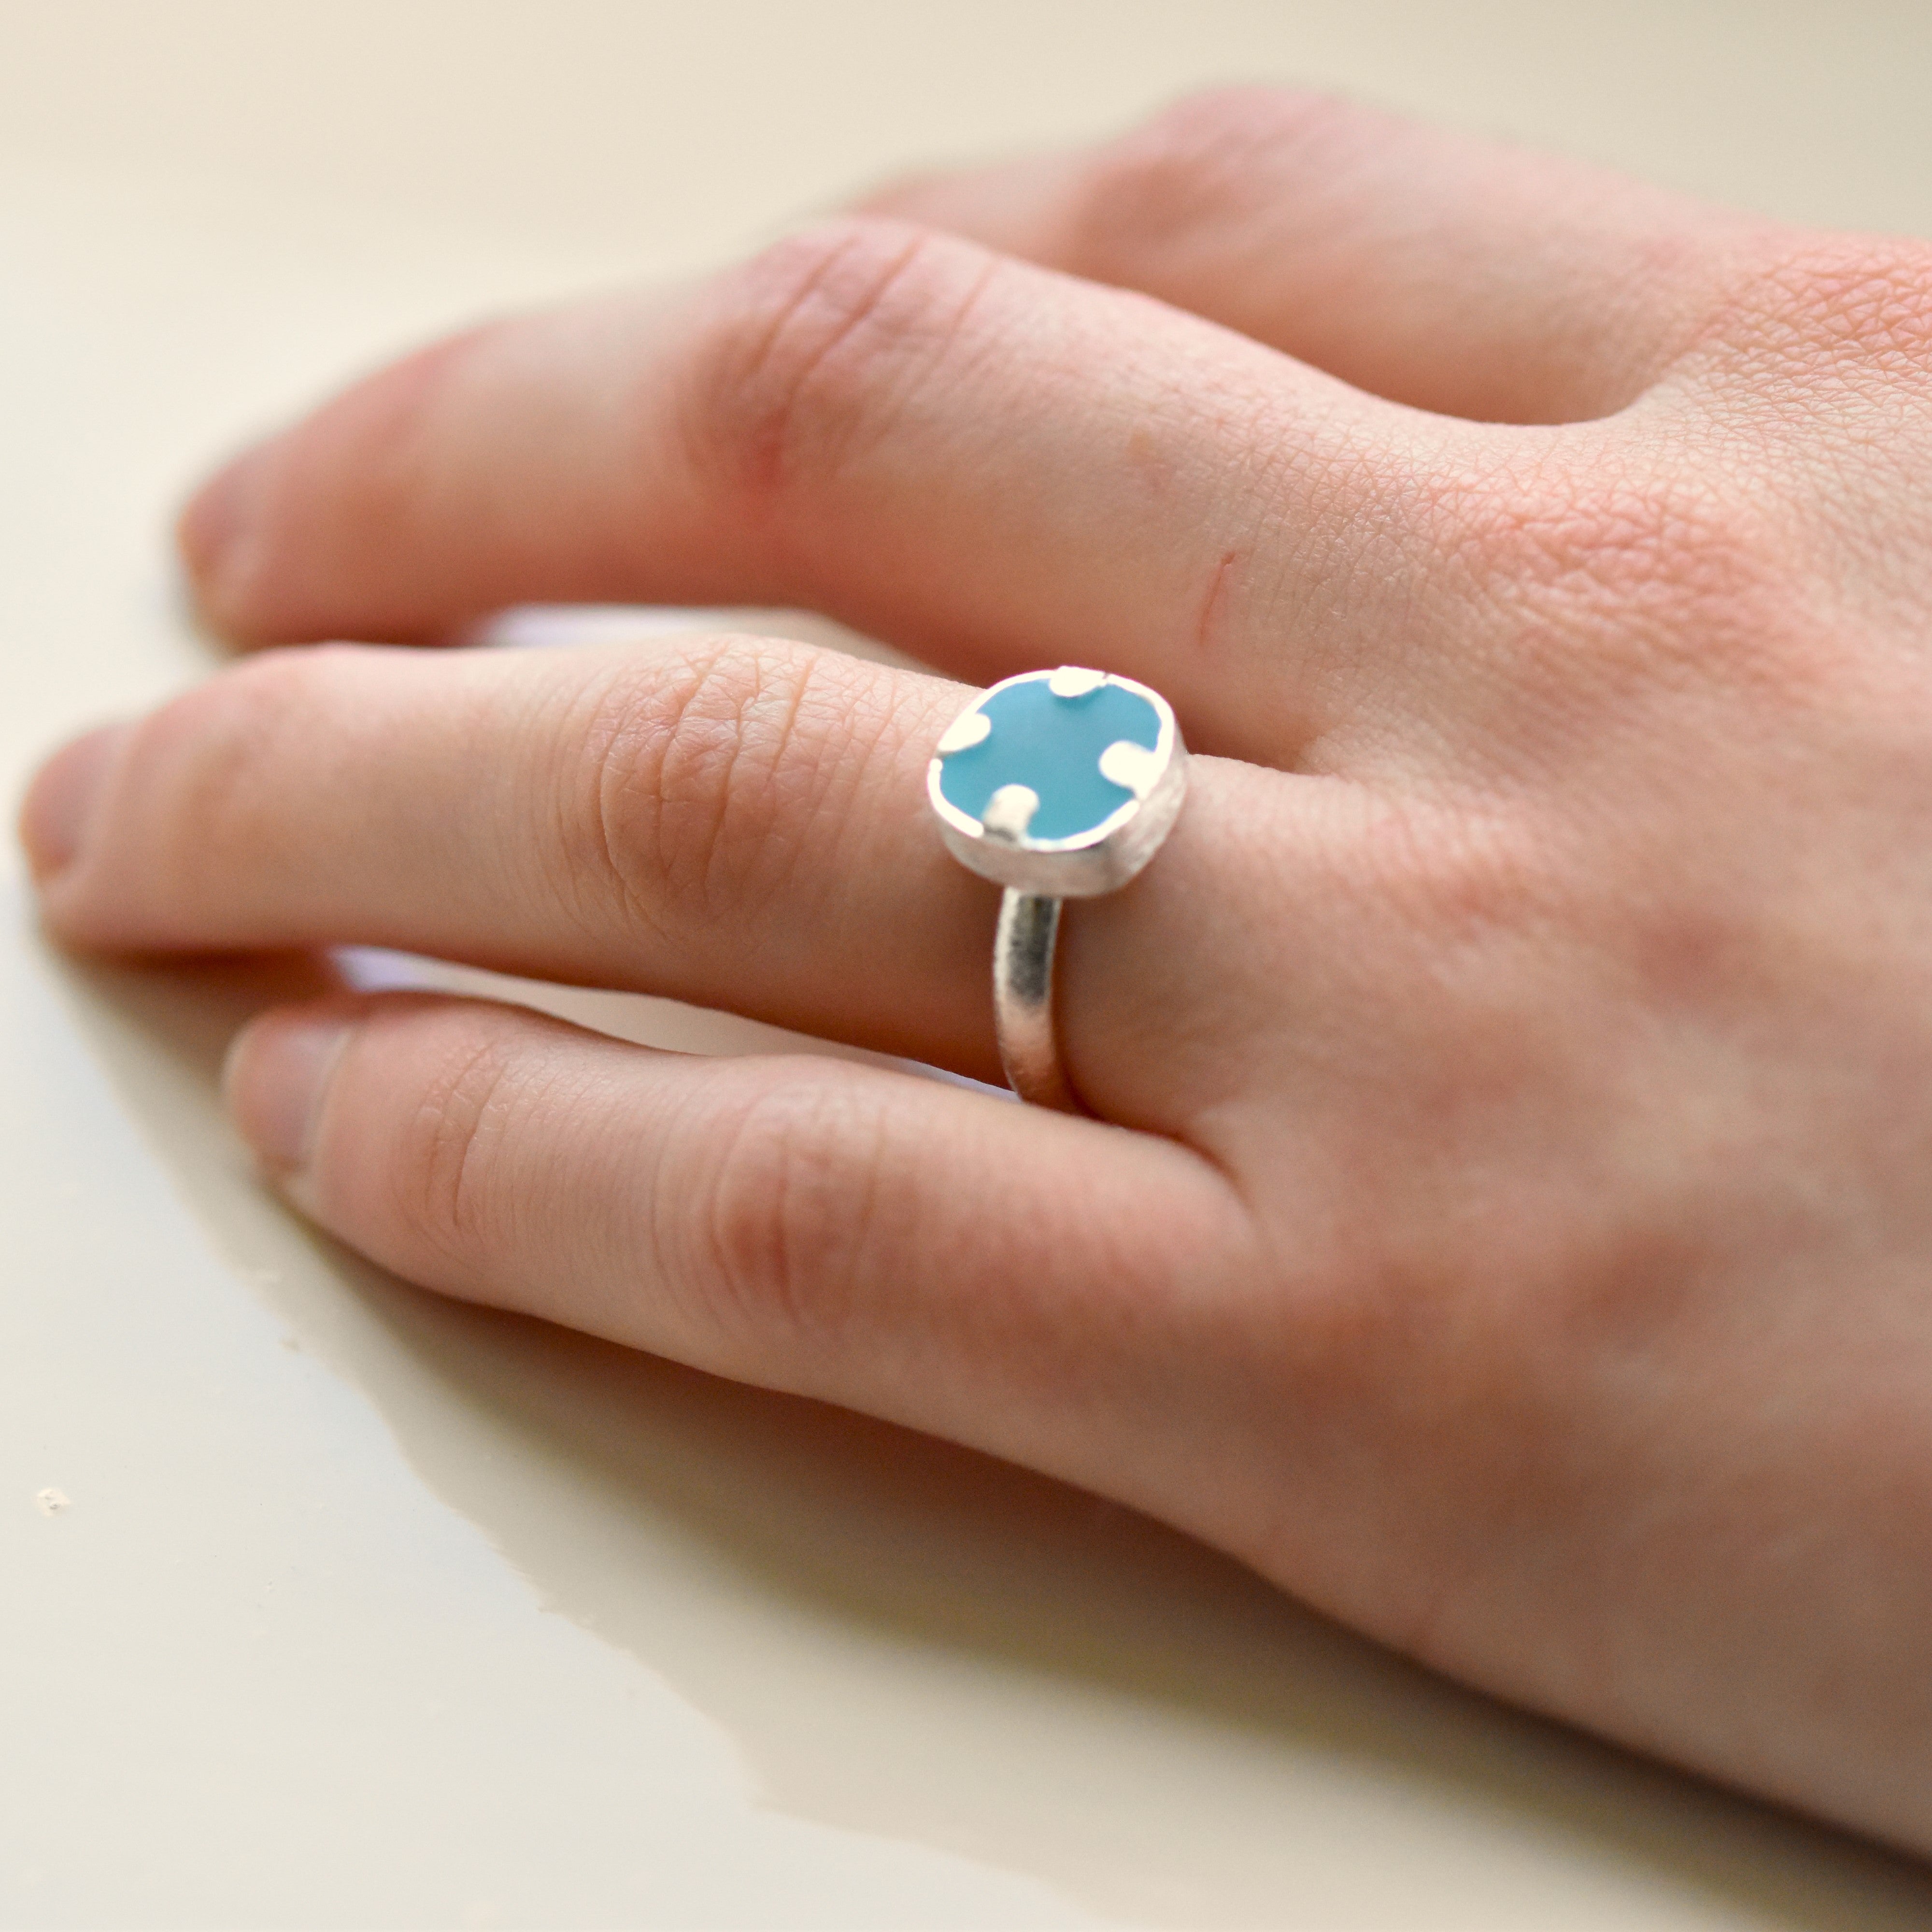 Serenity Ring in Blue